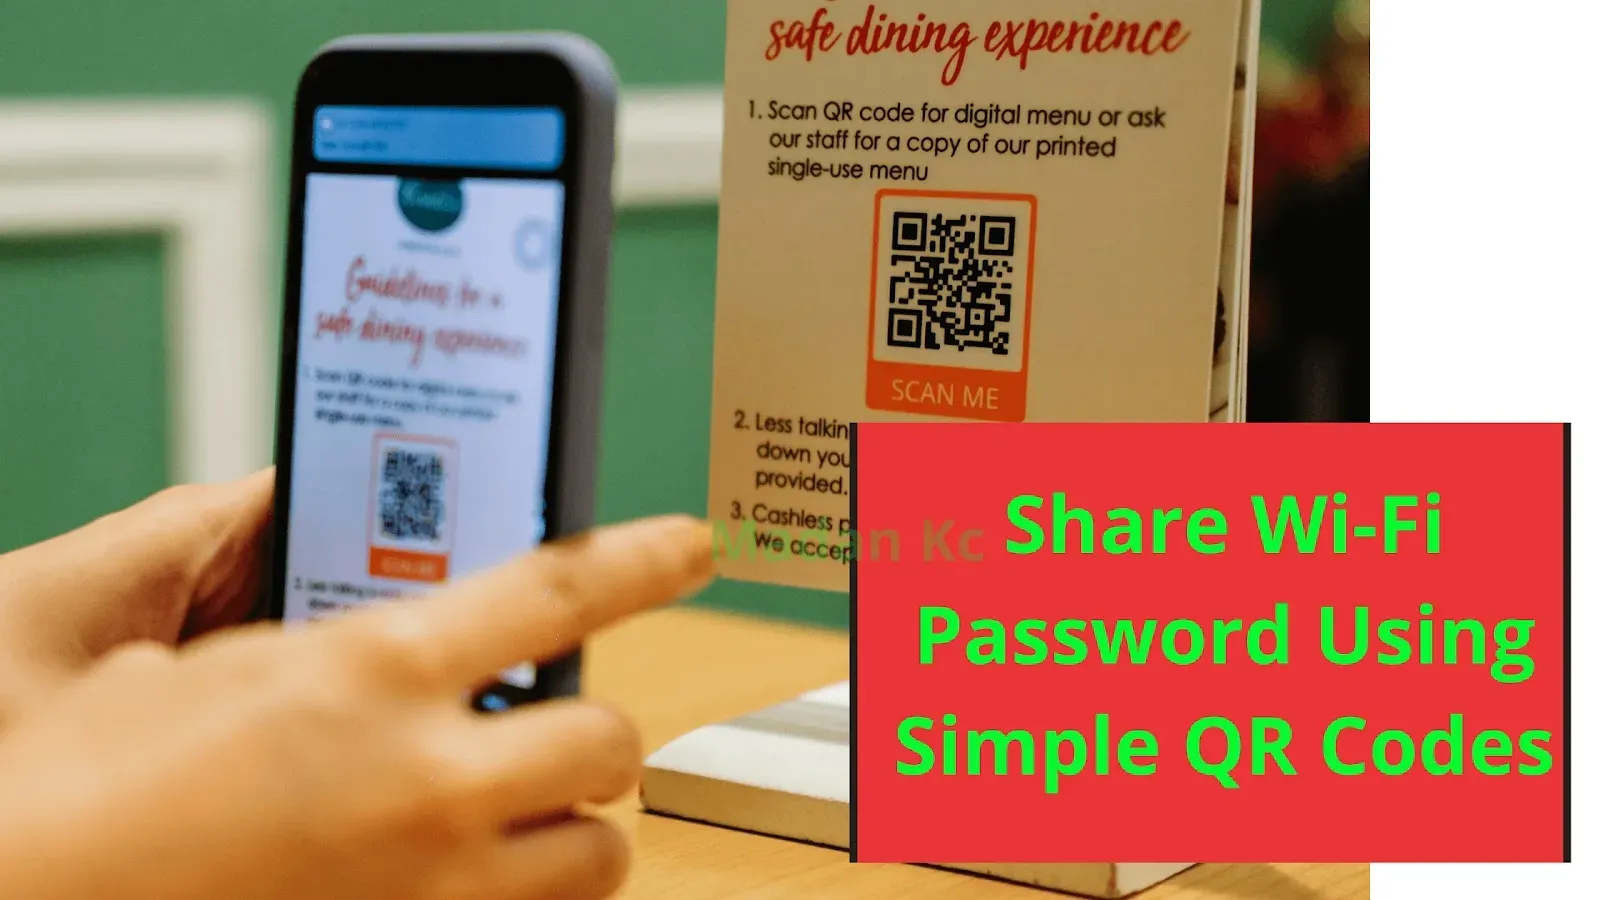 How to Share Wi Fi Password Using Simple QR Codes